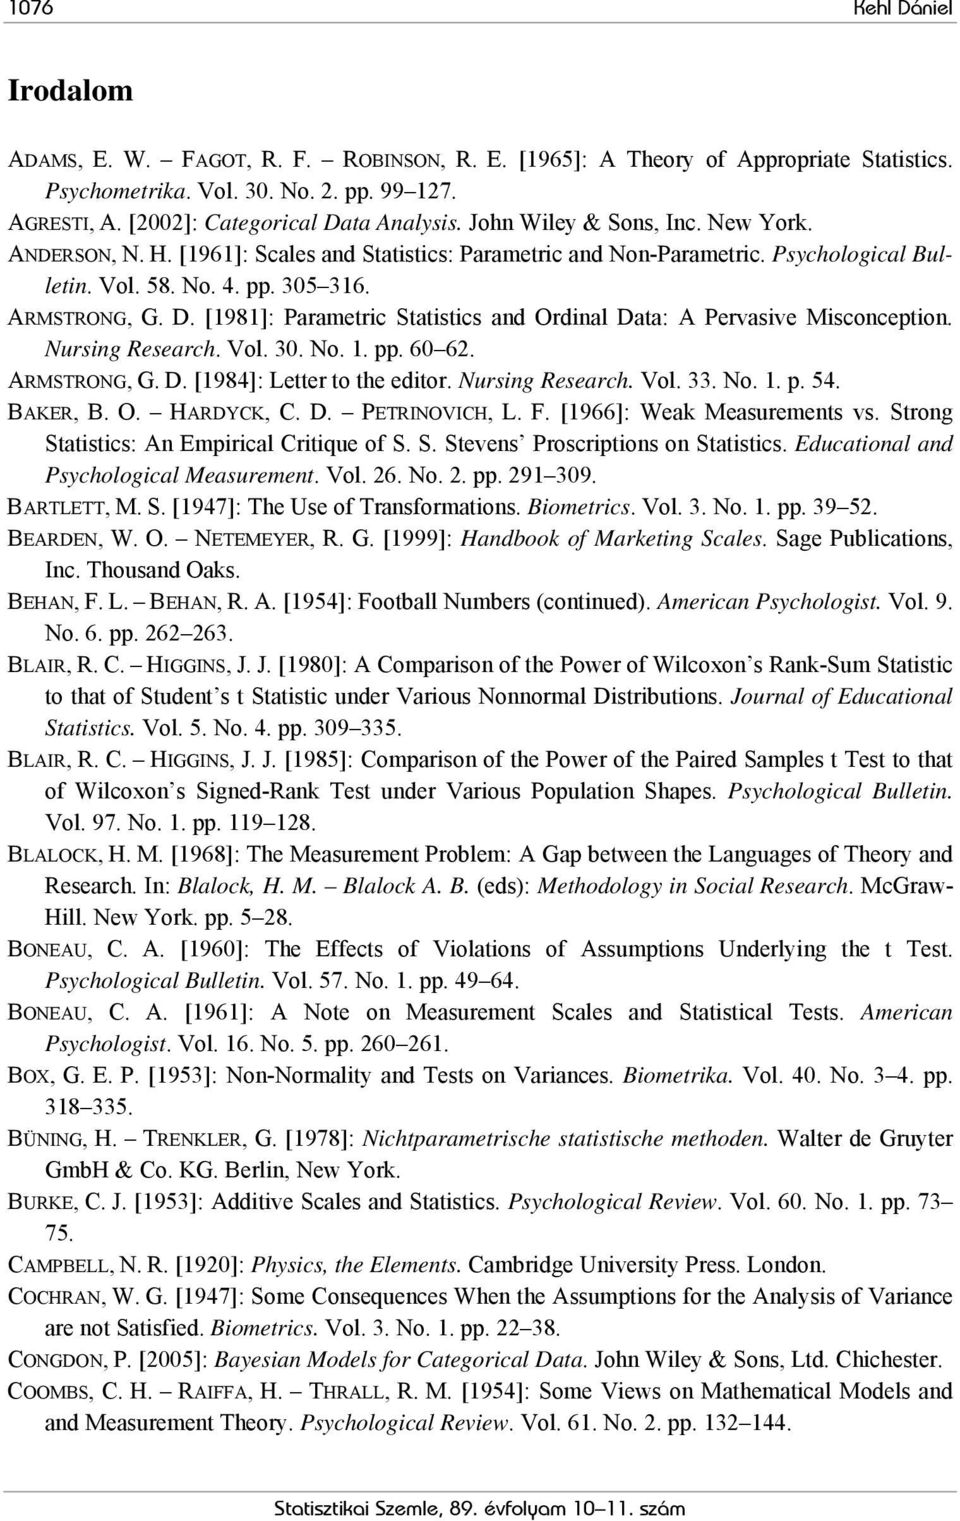 ARMSTRONG, G. D. [1981]: Parametric Statistics and Ordinal Data: A Pervasive Misconception. Nursing Research. Vol. 30. No. 1. pp. 60 62. ARMSTRONG, G. D. [1984]: Letter to the editor.